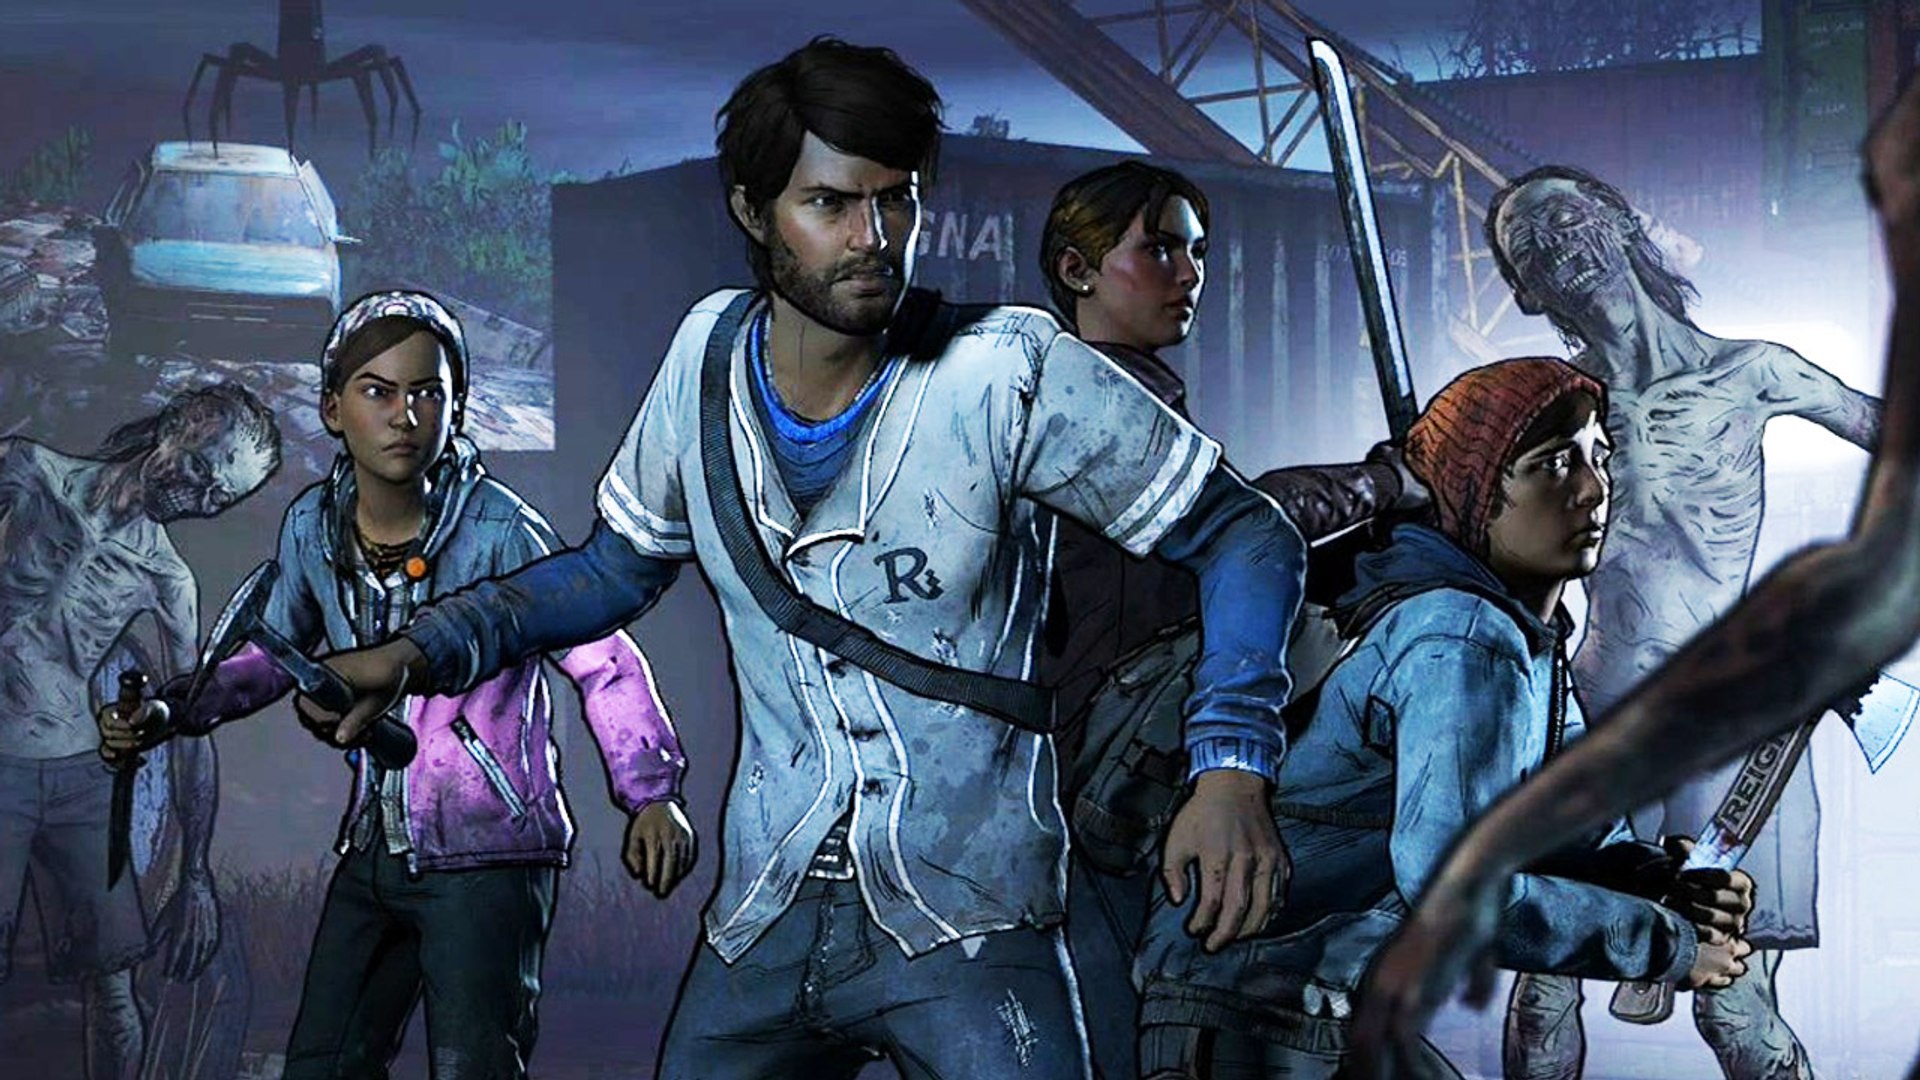 TWD A New Frontier. The Walking Dead: a New Frontier - Episode 1. The Walking Dead Нью Фронтир. Ходячие the New Frontier. Игра ходячие мертвецы 2023